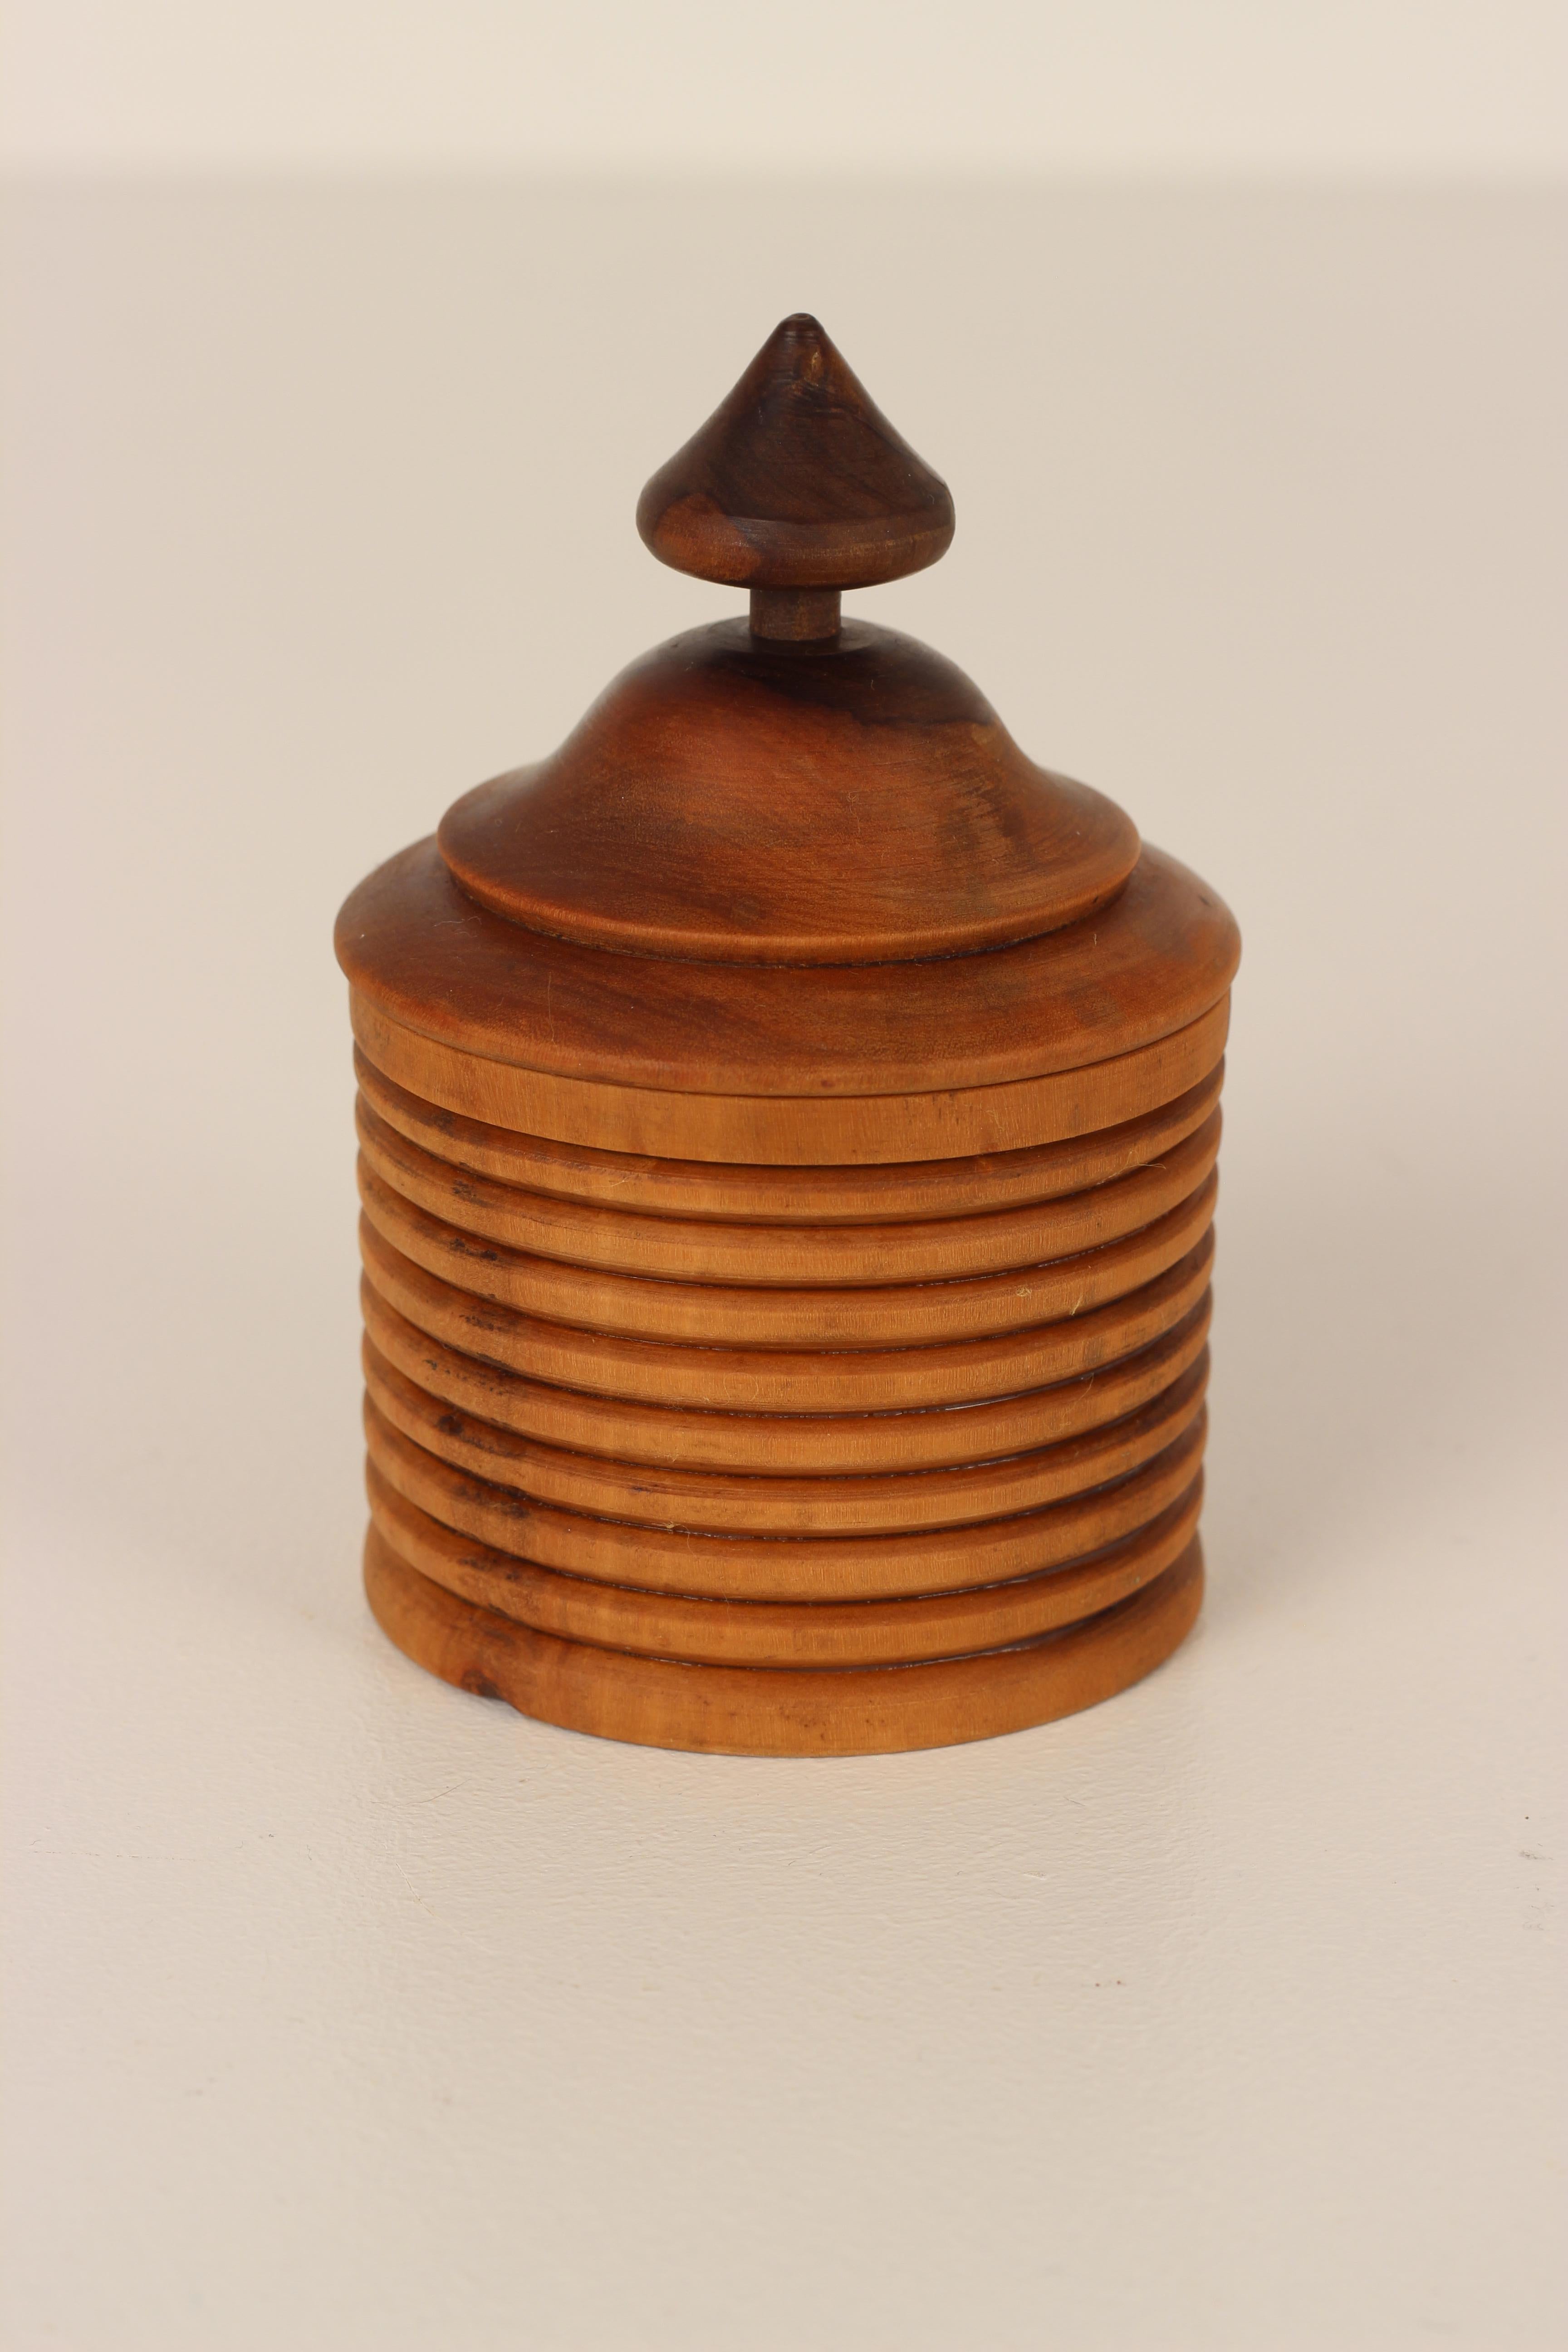 A skilfully crafted piece of turned treen with an interesting silhouette. The piece opens into two sections leaving an interior space to prize, hide or store a treasure or two. There is a feeling of the Grand Tour about it, with the top resembling a